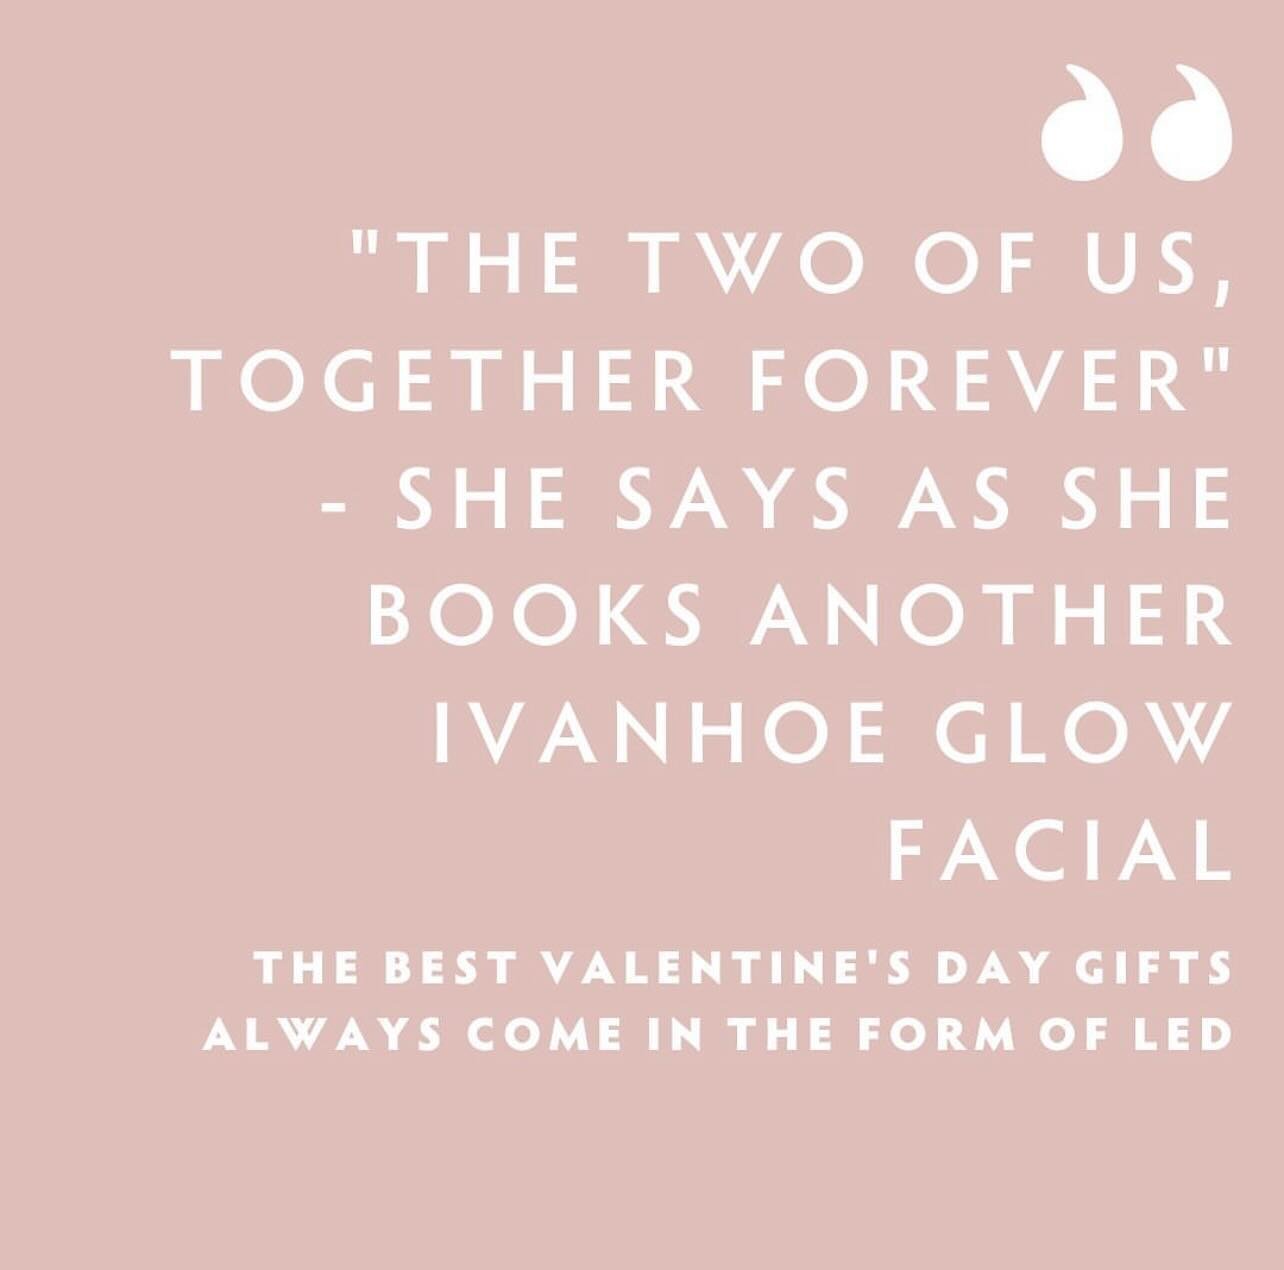 Make sure your special someone says those four magical words every woman wants to hear this Valentine&rsquo;s Day - &ldquo;I bought you a facial&rdquo; 😍

Have someone that needs a little hint, hint, nudge, nudge? Tag them below 

#valentinesdaymelb